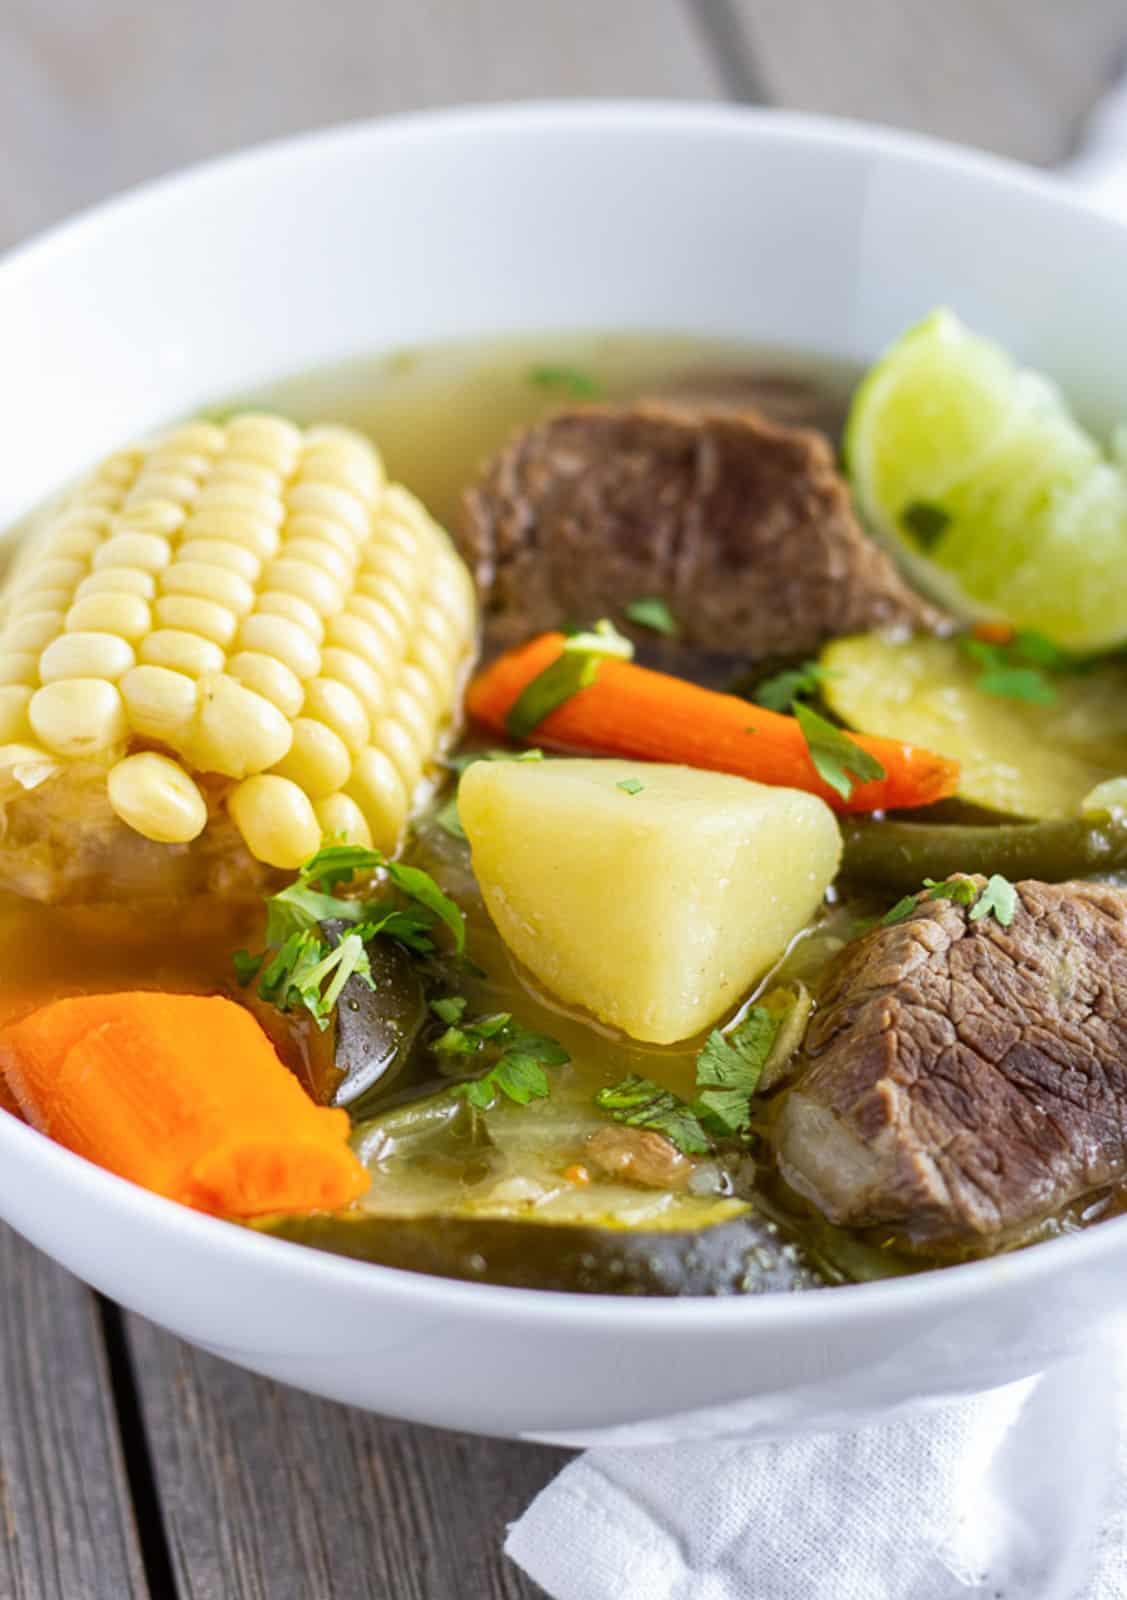 Corn on the cob, potato, beef, carrots, and zucchini, in a broth.